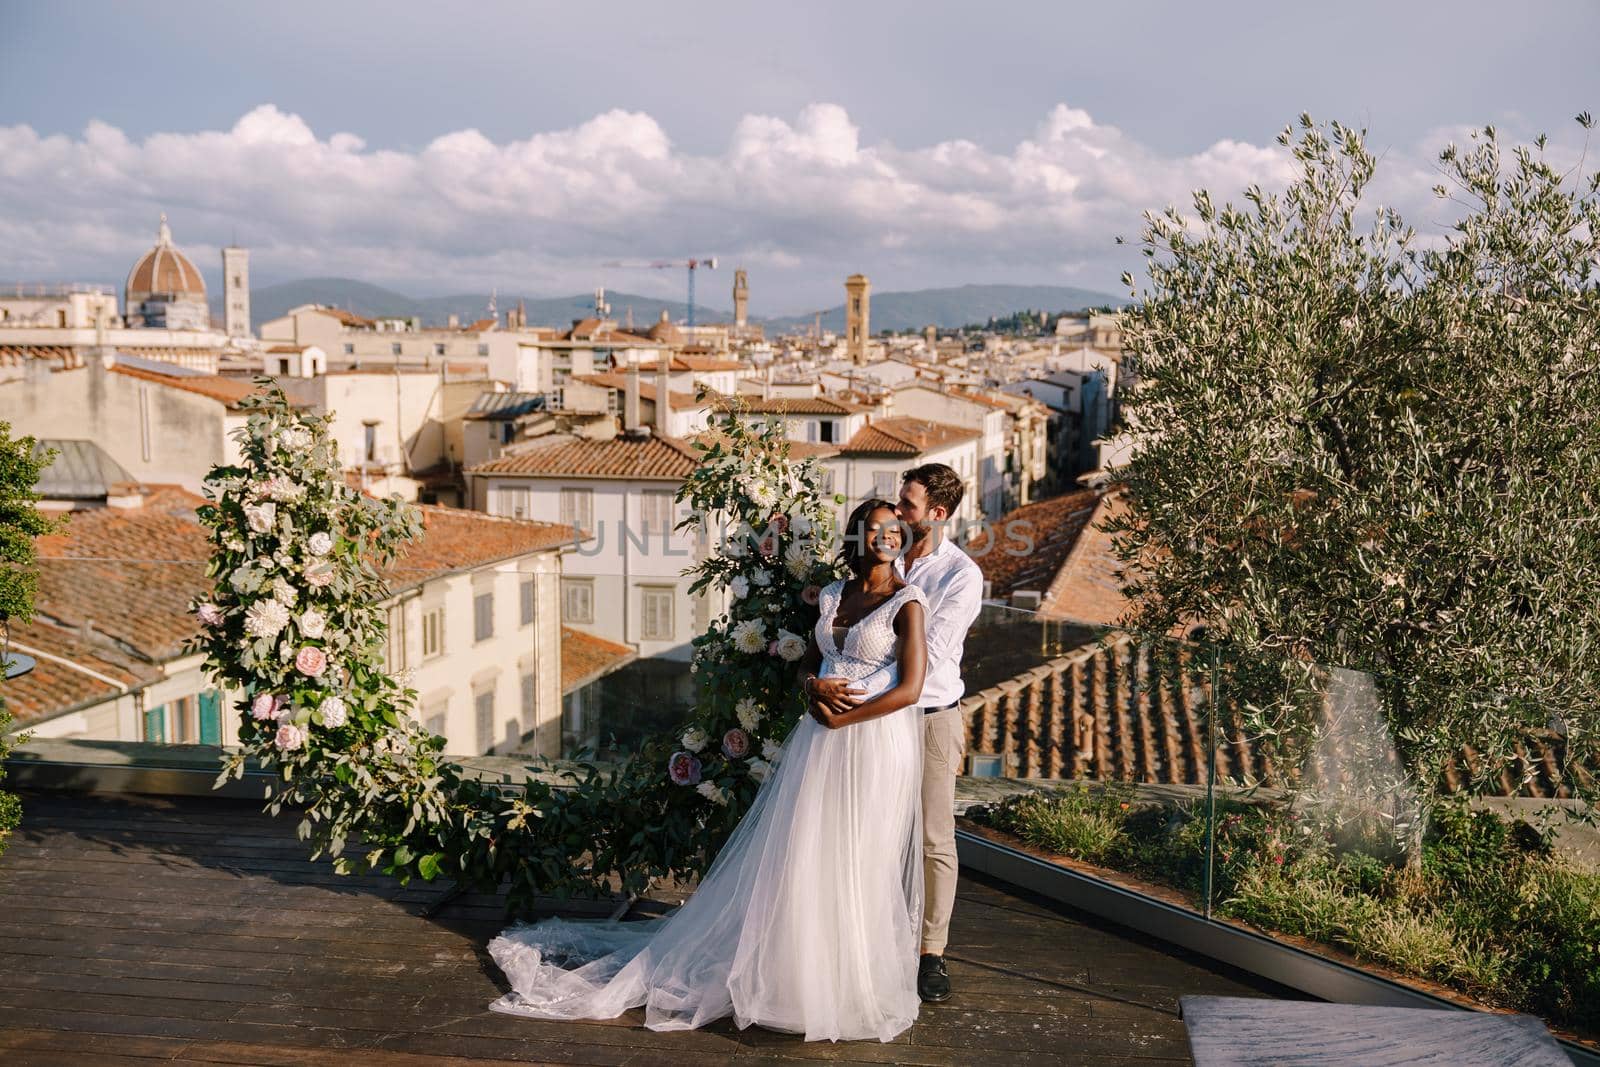 Multiethnic wedding couple. Destination fine-art wedding in Florence, Italy. A wedding ceremony on the roof of the building, with cityscape views of the city and the Cathedral of Santa Maria Del Fiore by Nadtochiy